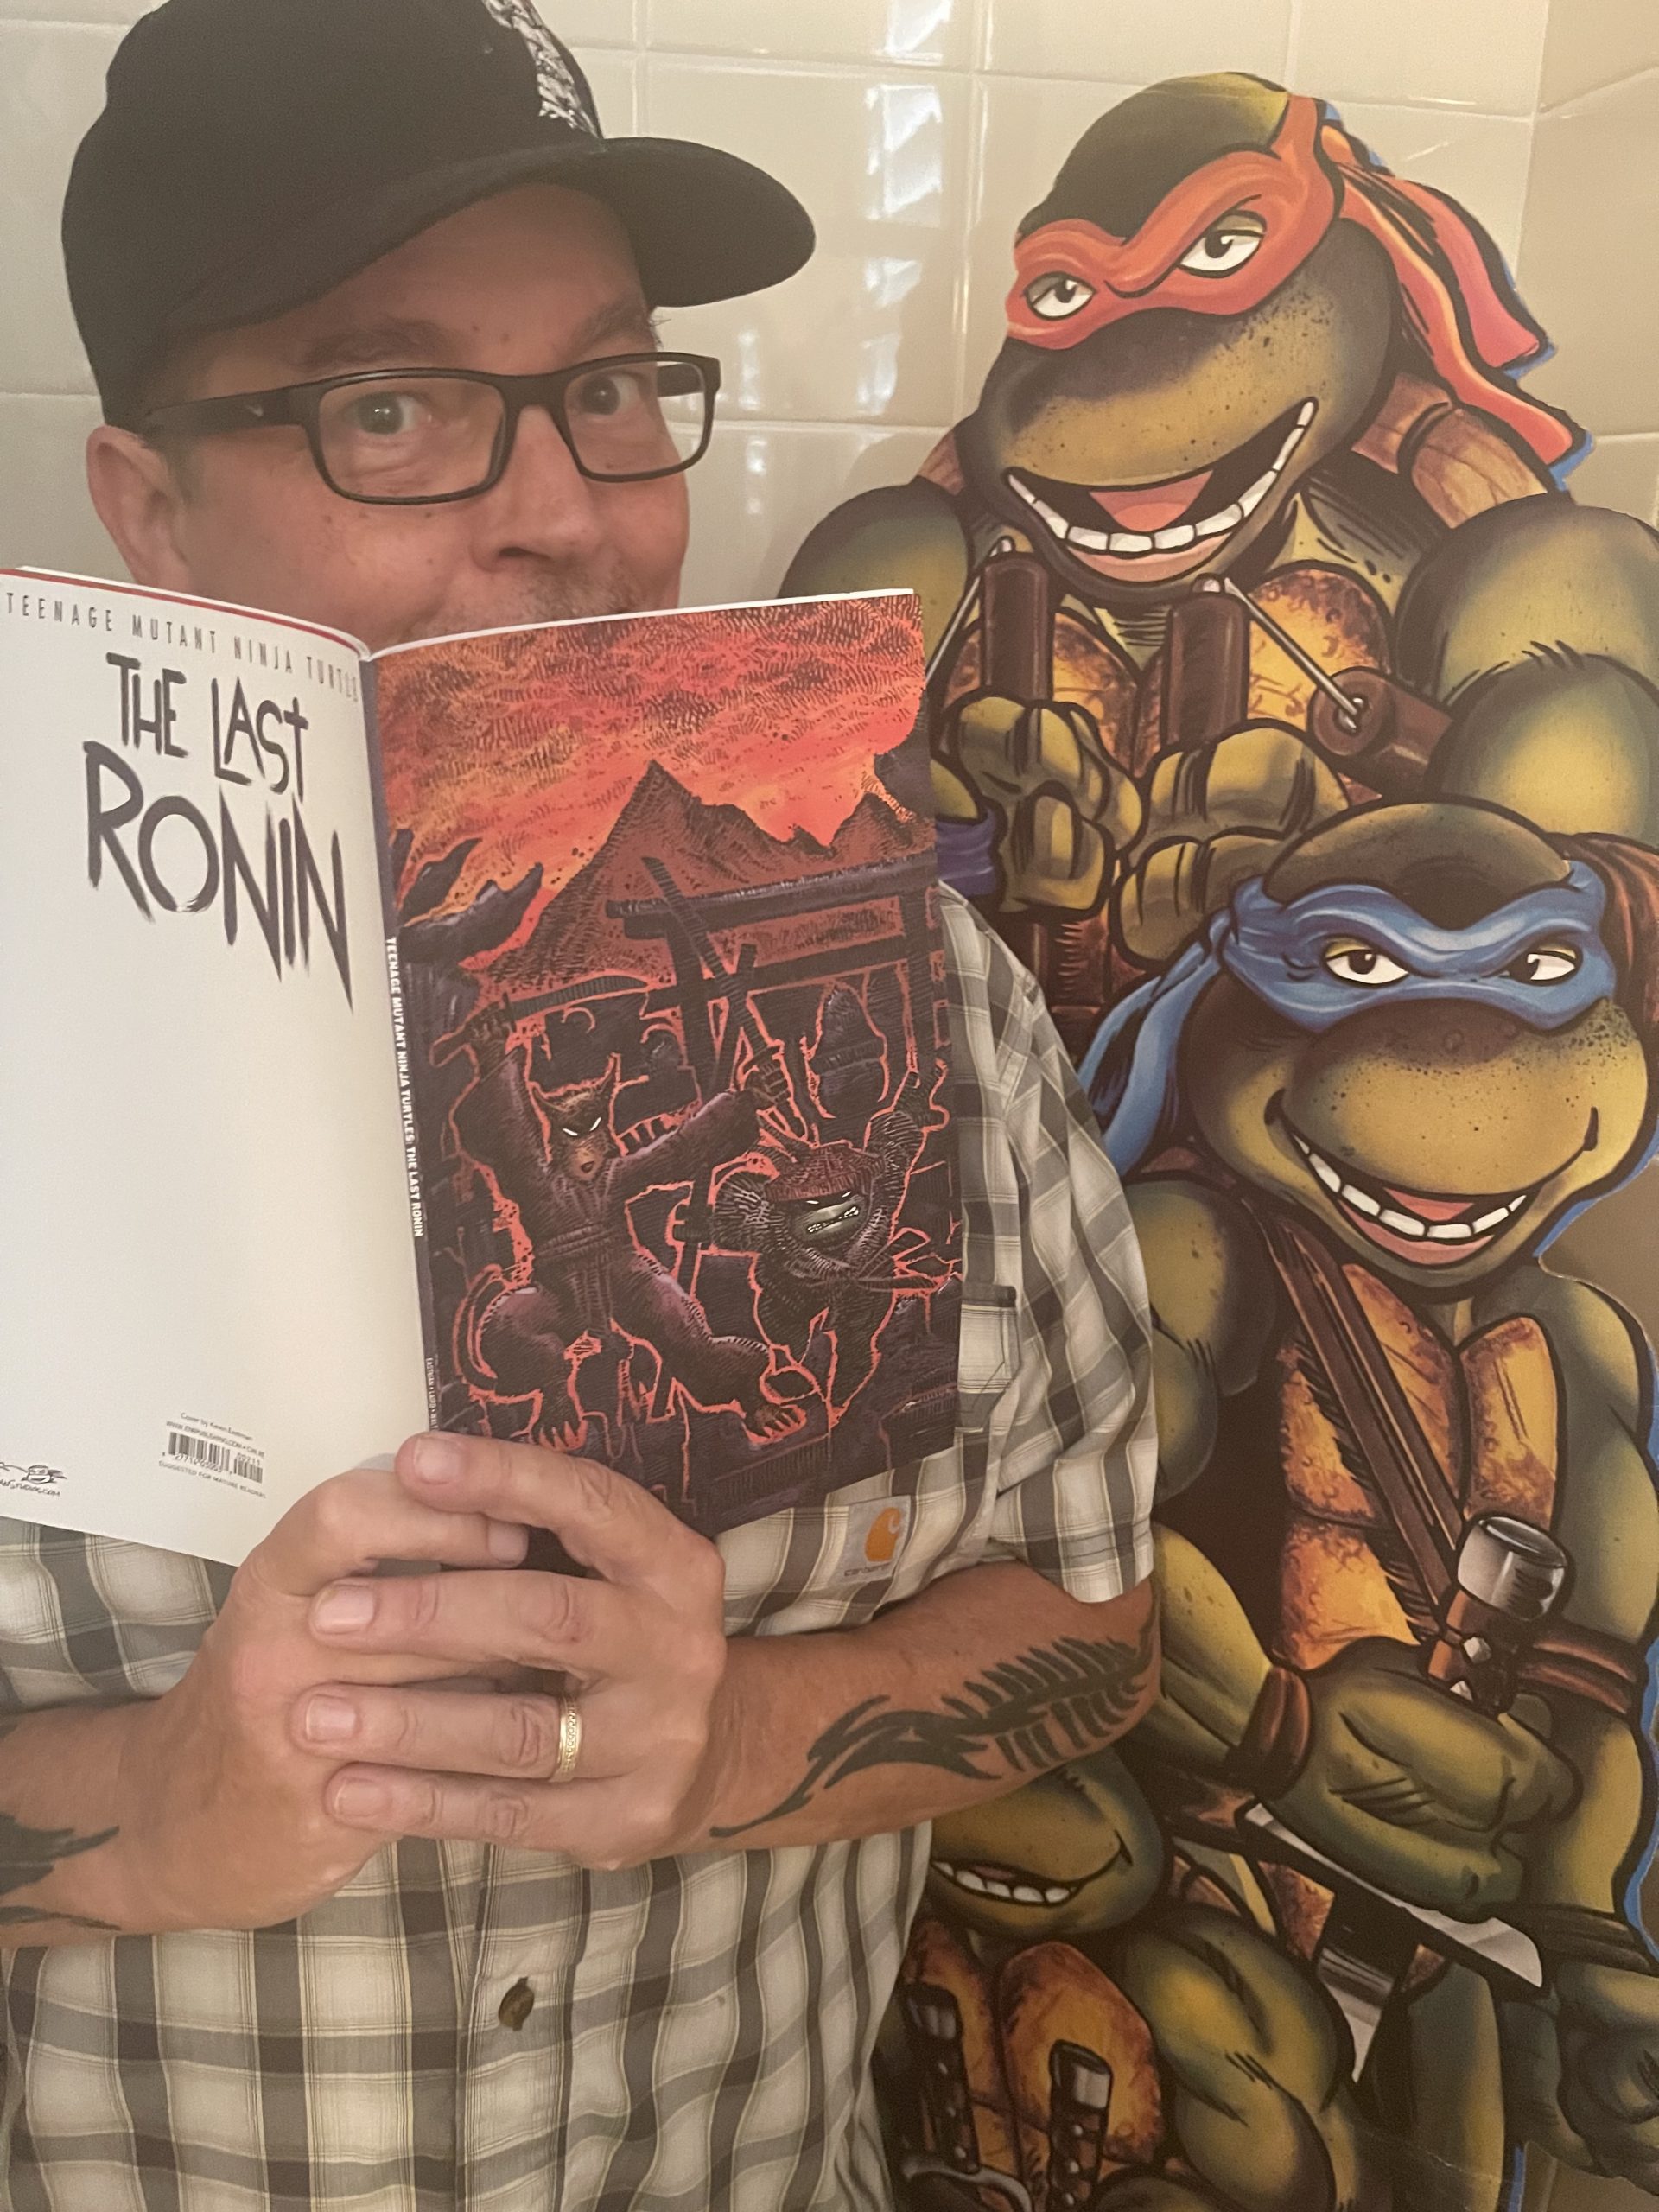 The Last Ronin issue 4, Kevin Eastman Studios Exclusive SIGNED